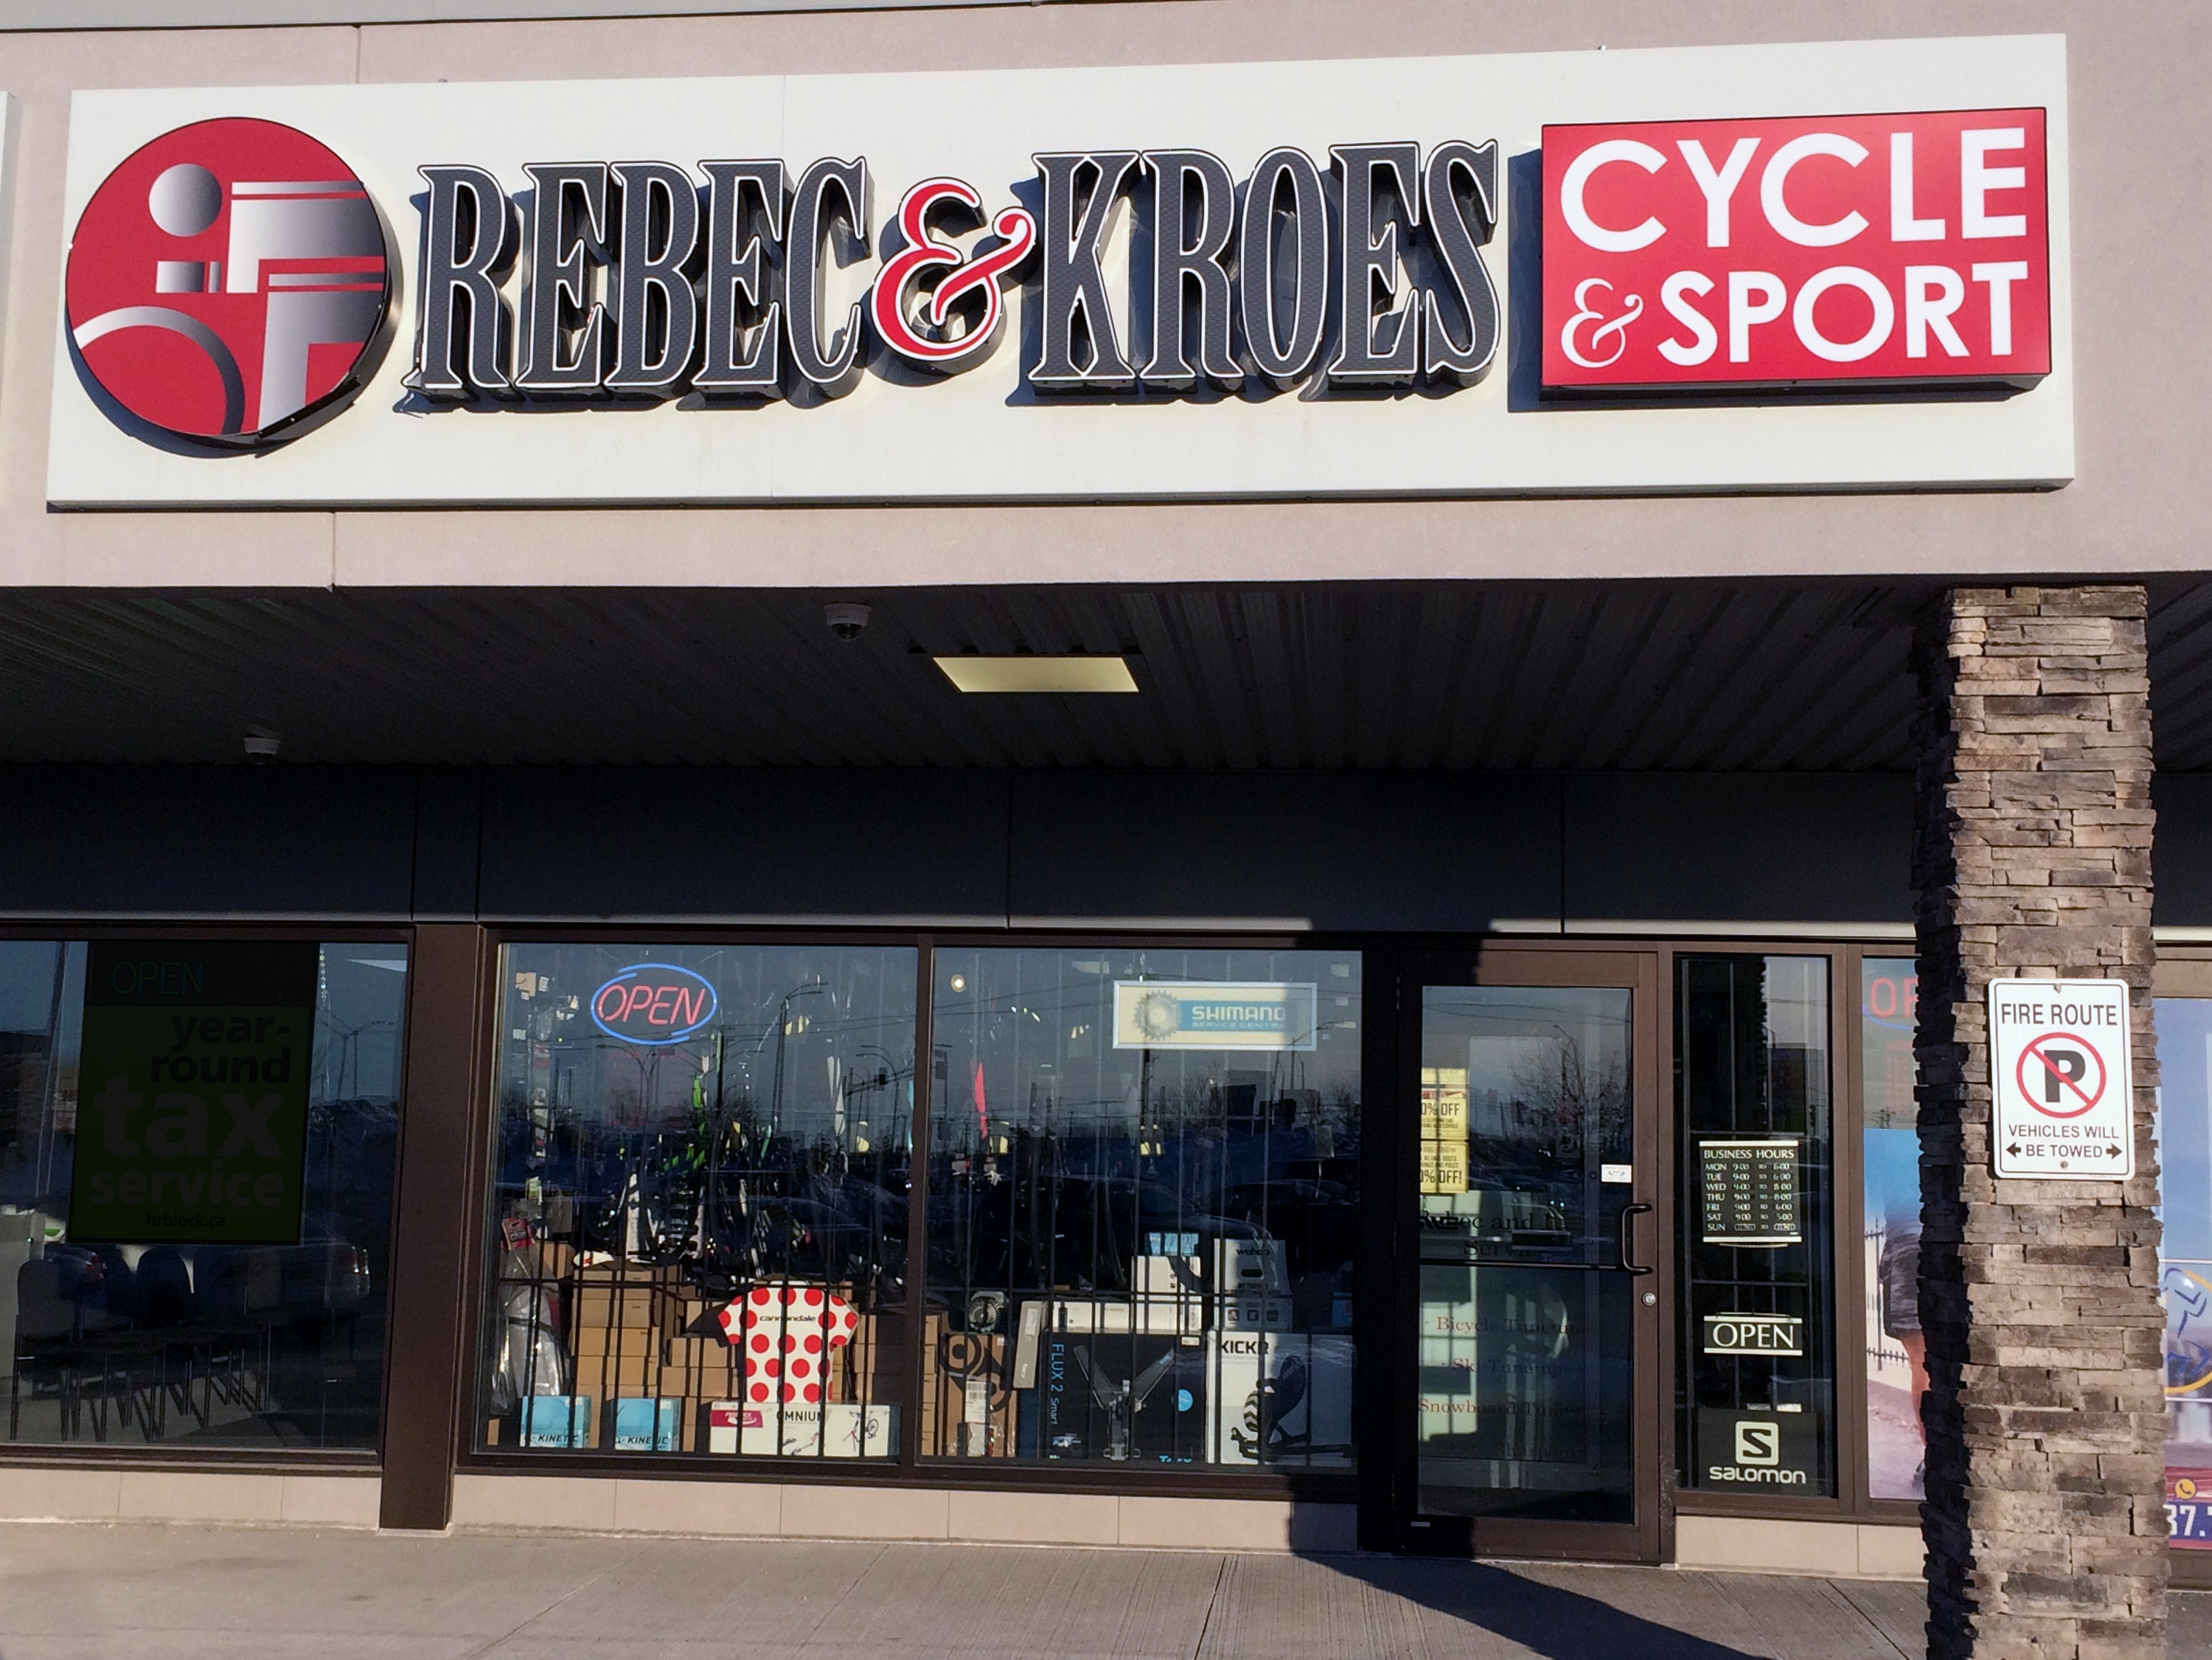 rebec and kroes cycle and sport